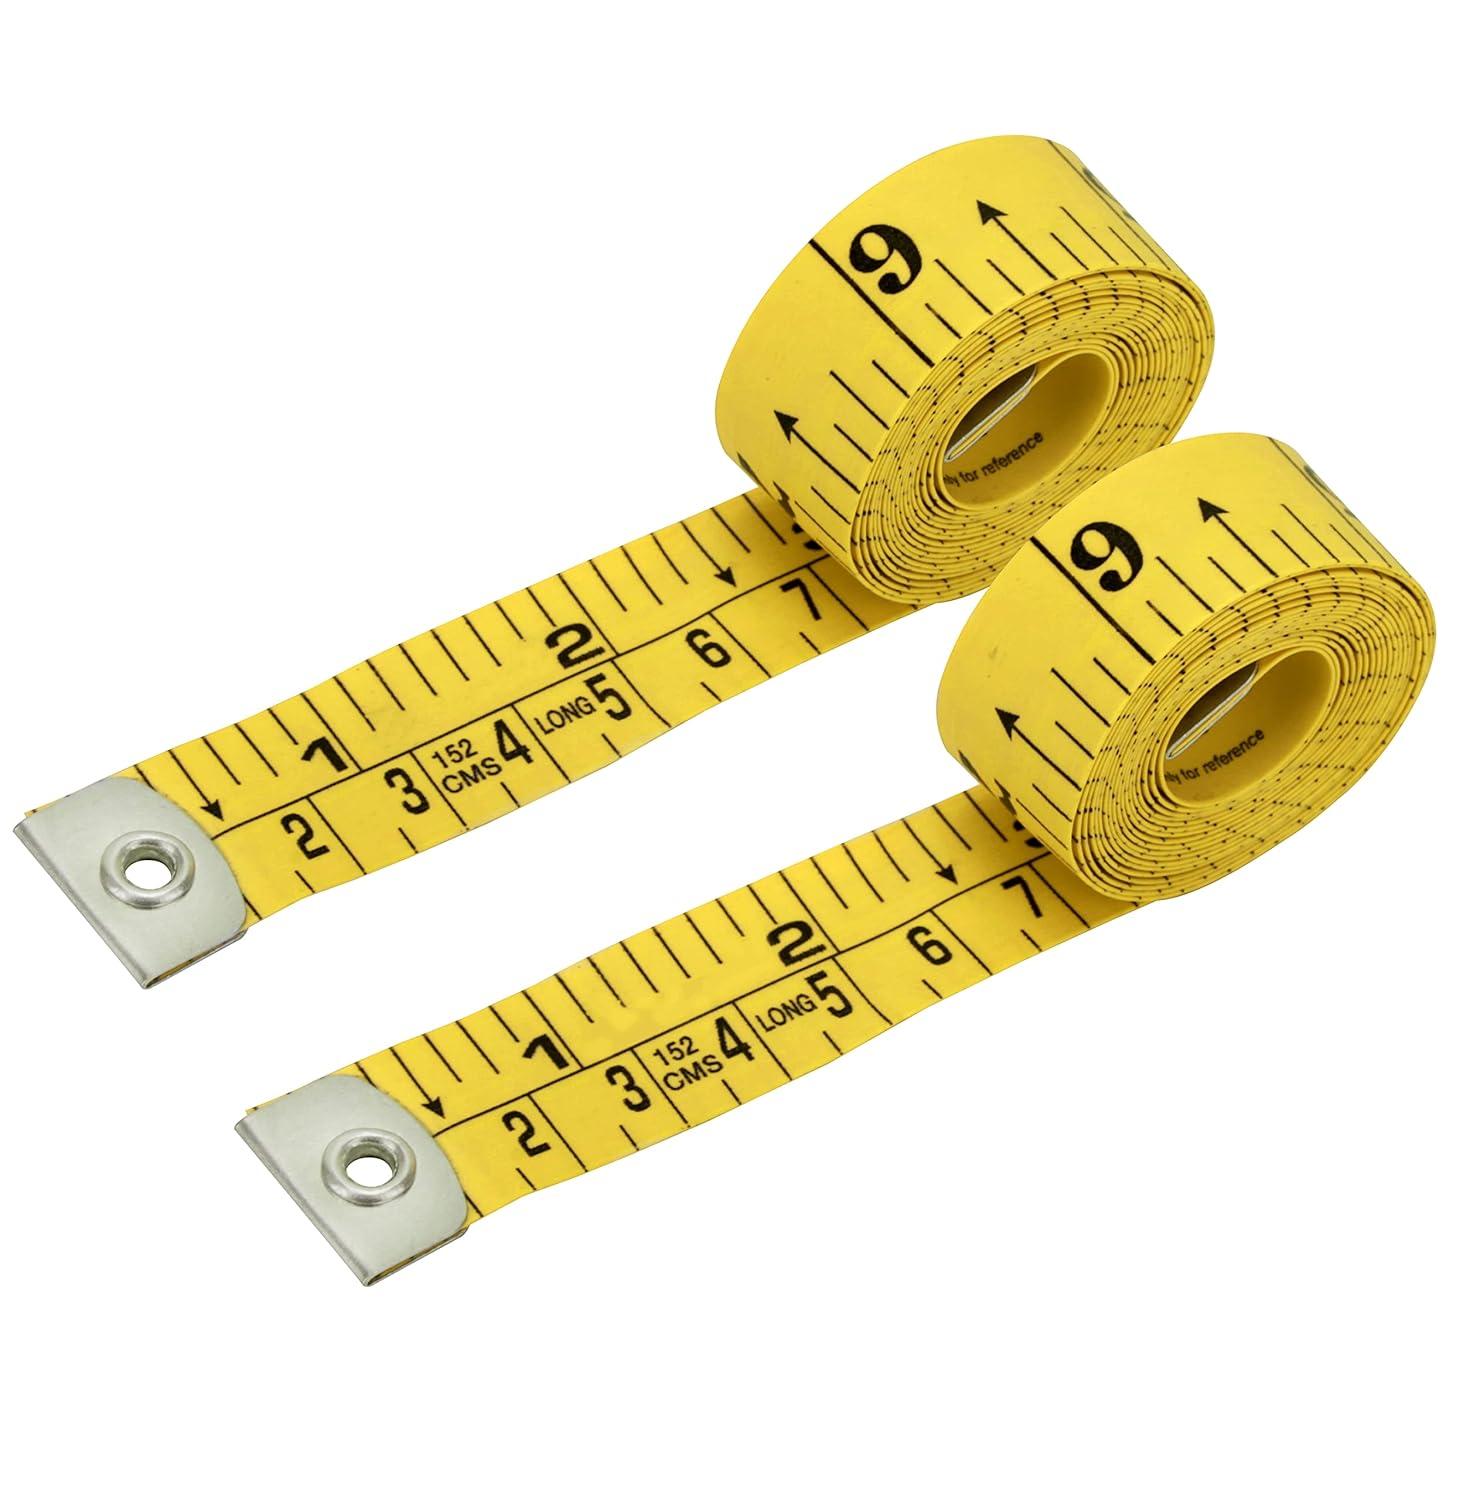  Pack of 2 Soft Tape Measure, ,Accurate Measuring Tape for Body, Fabric  Tape Measure, Dual Scale Cloth Sewing Tape Measure,Tailor Ruler